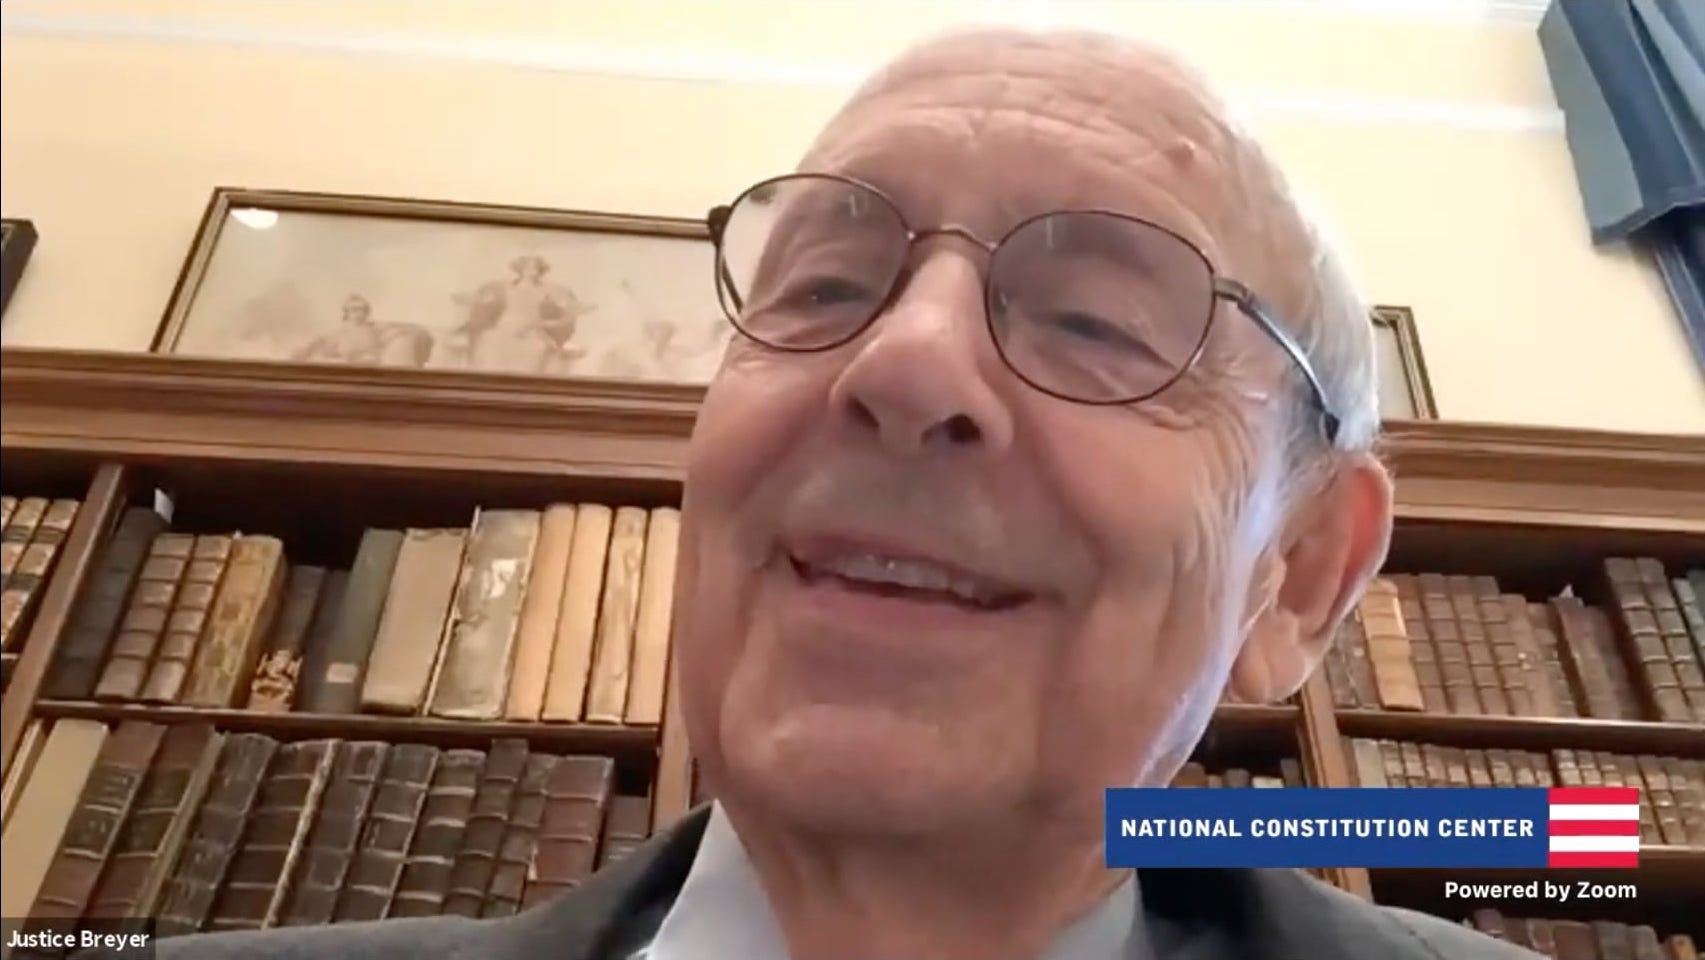 Screenshot of Stephen Breyer's face with bookcase in background and National Constitution Center logo on screen